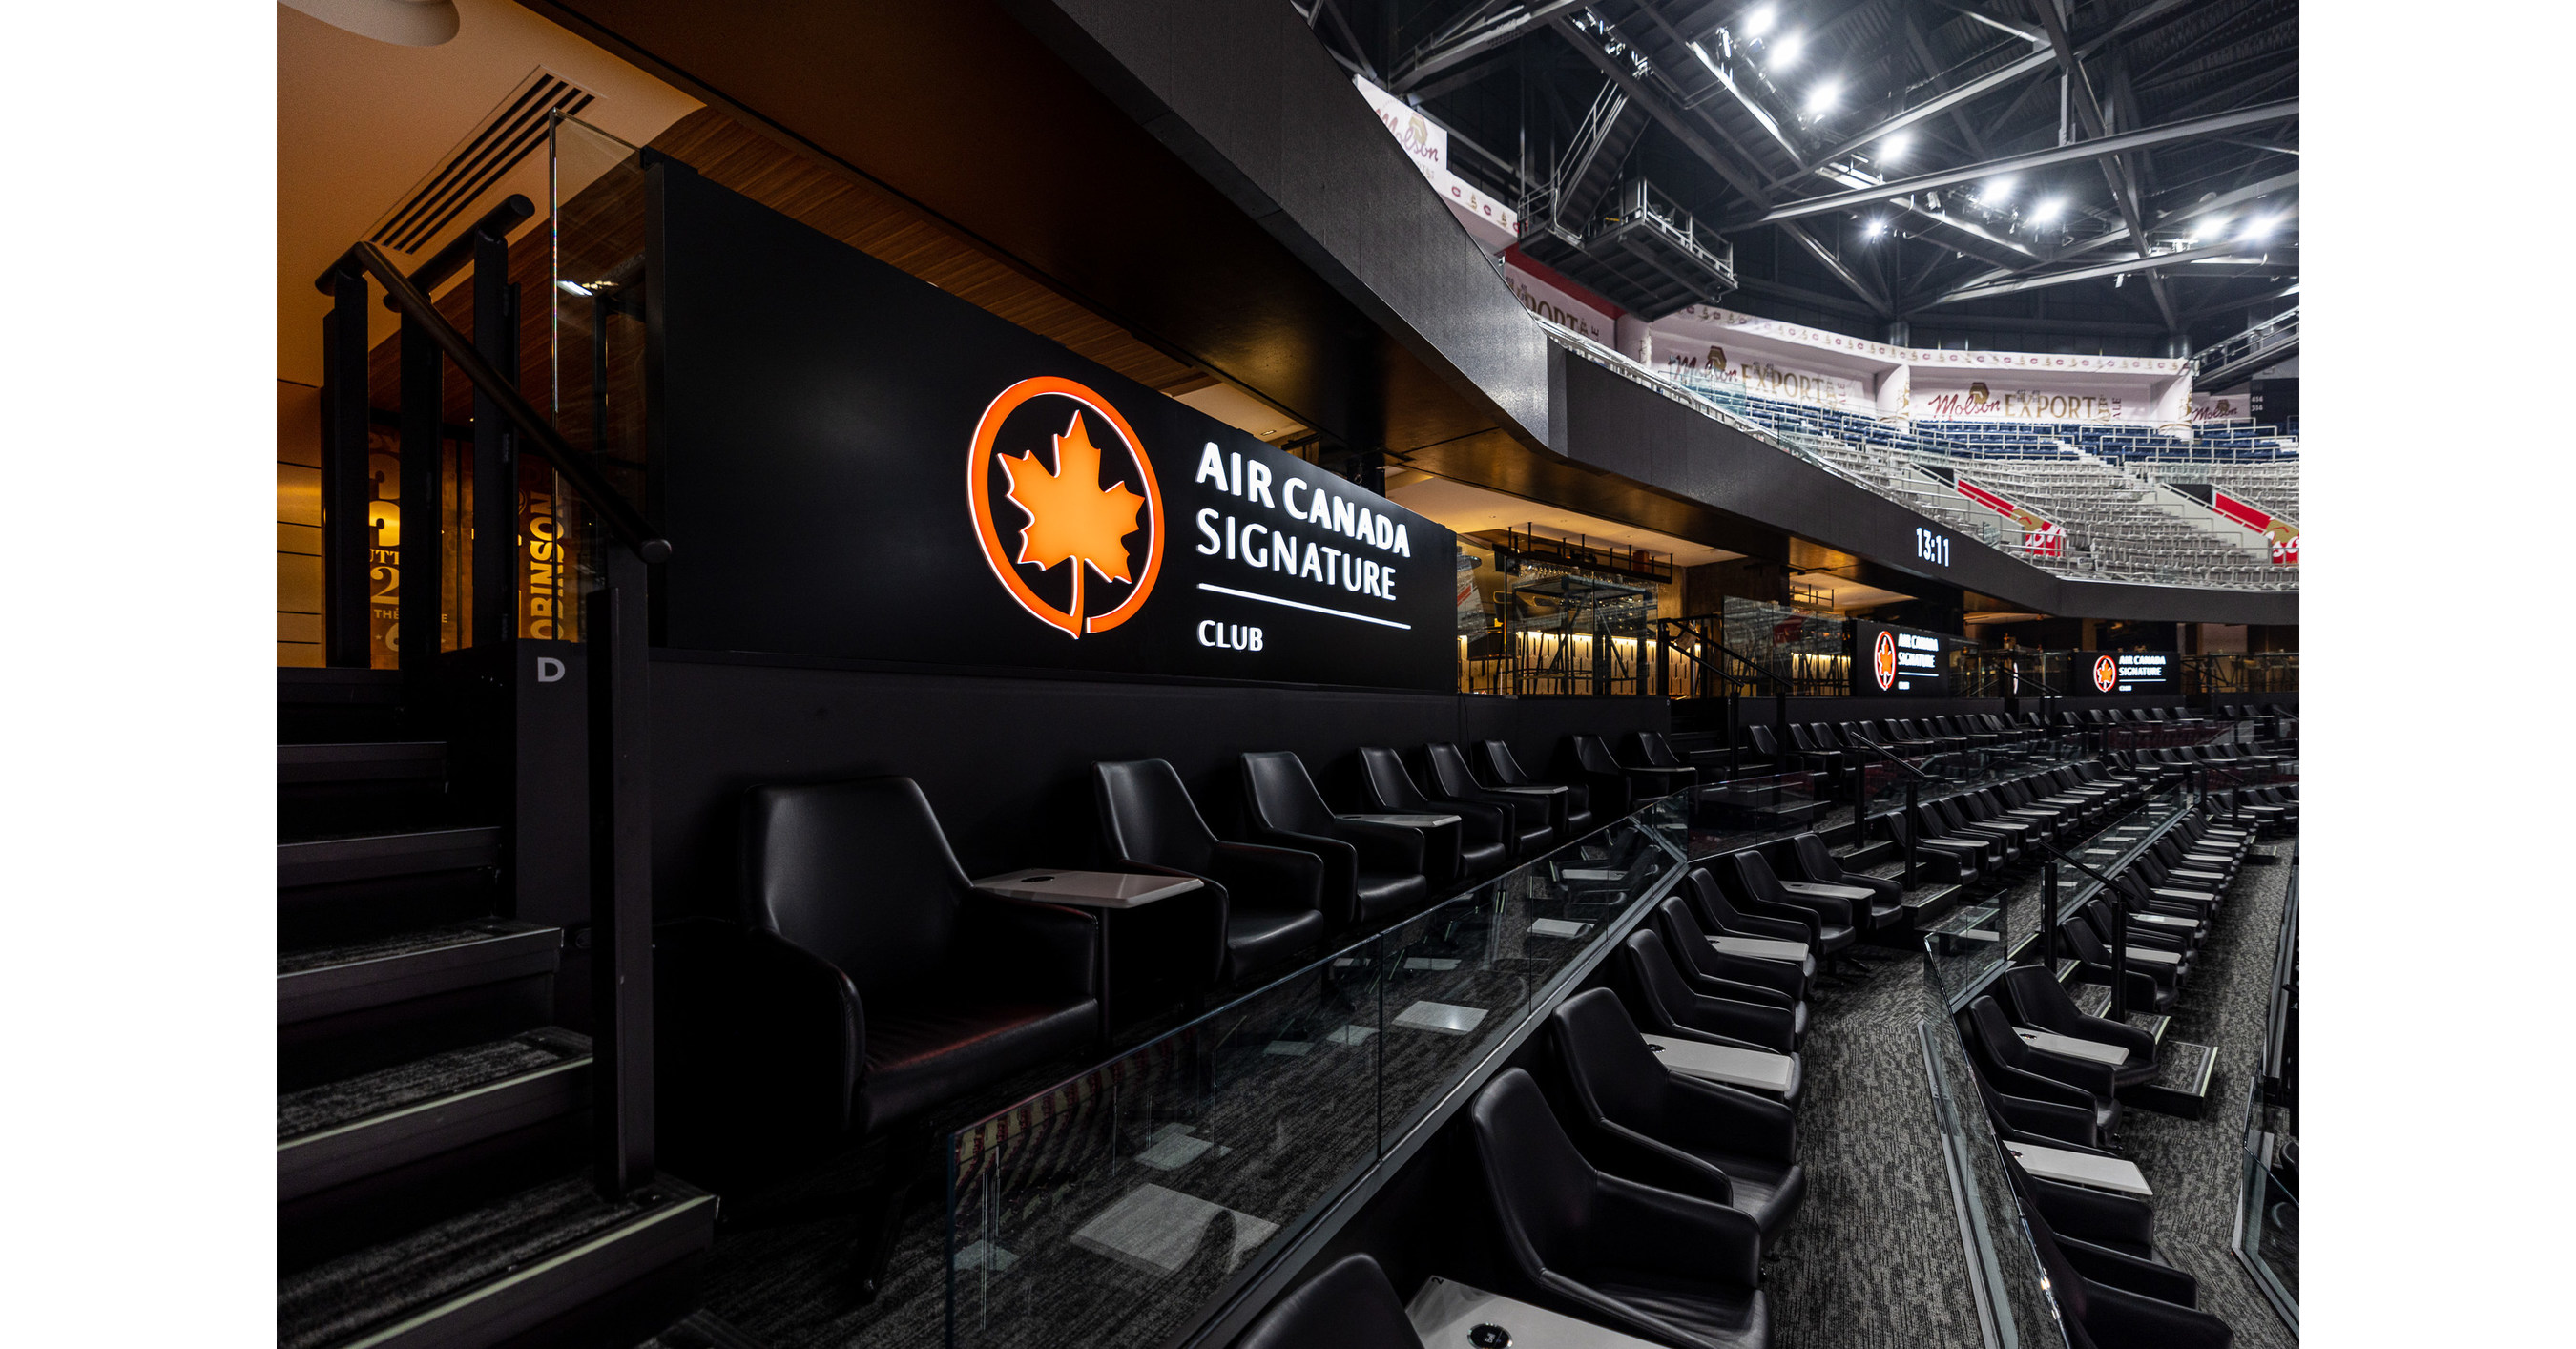 Air Canada and the Montreal Canadiens Inaugurate New Air Canada Signature  Club Offering Premium Member Experience at Montreal Canadiens Home Games